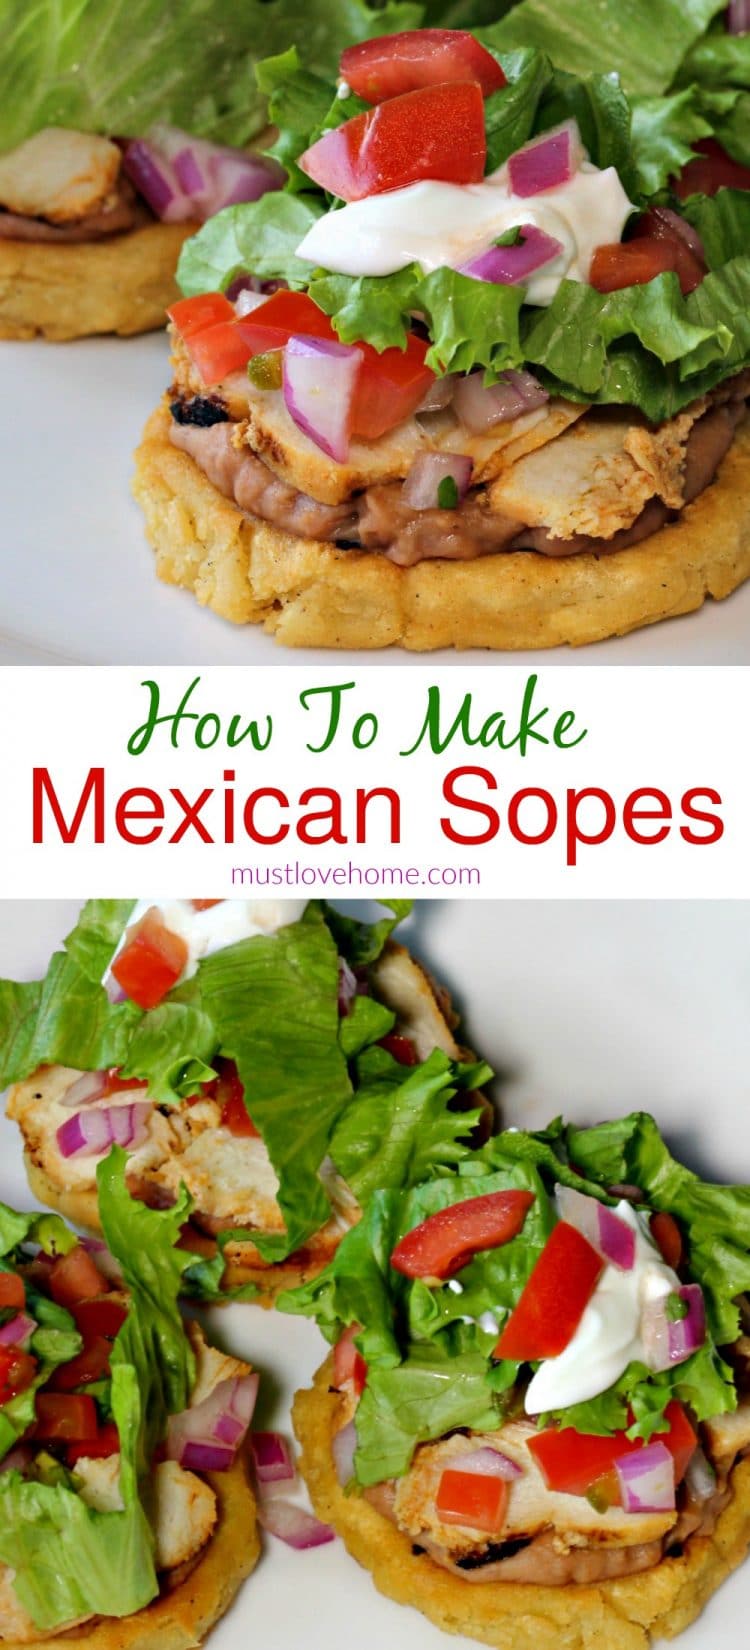 Easy Mexican Sopes are fresh and delicious appetizers that will be a hit at your next party - top them with your favorites like beans, cheese and sour cream!